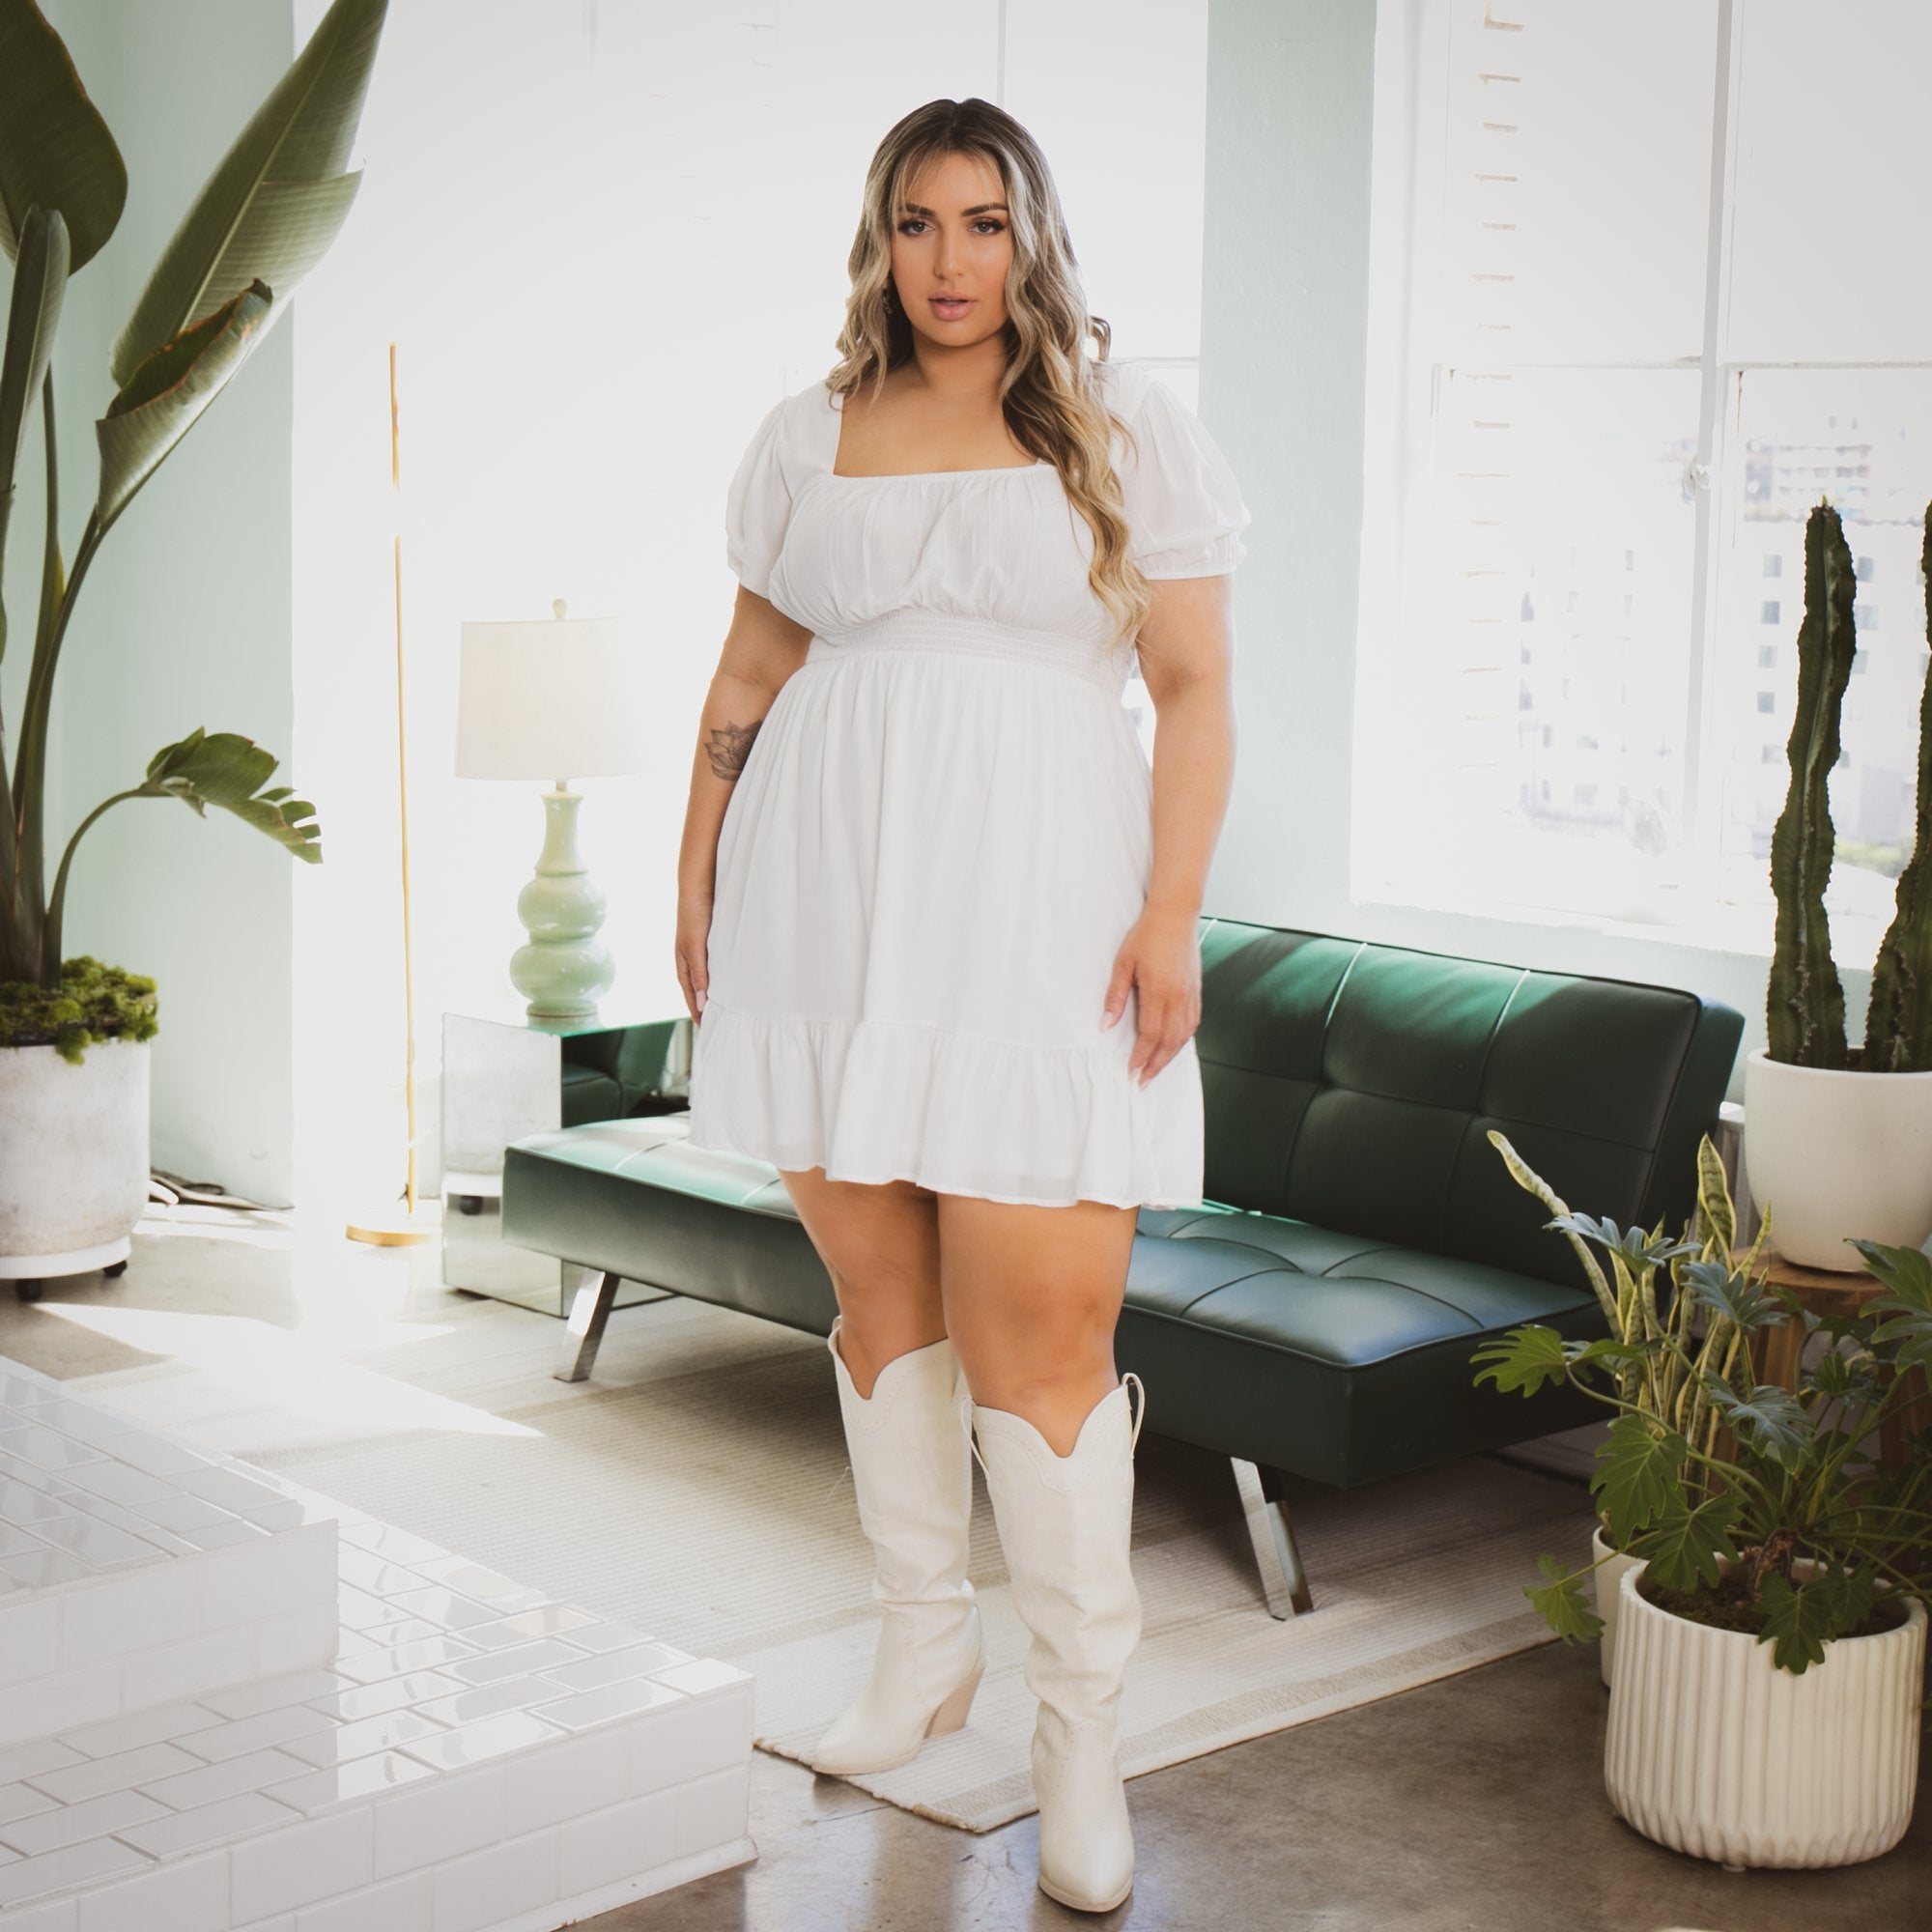 Curvy Sense - The sexy  Faux Leather Peplum Dress  is back in town. Only  $30 at curvysense.com. . Use code: PARTY15 for 15% off . . .  #plussizefashion #plussize #plus #